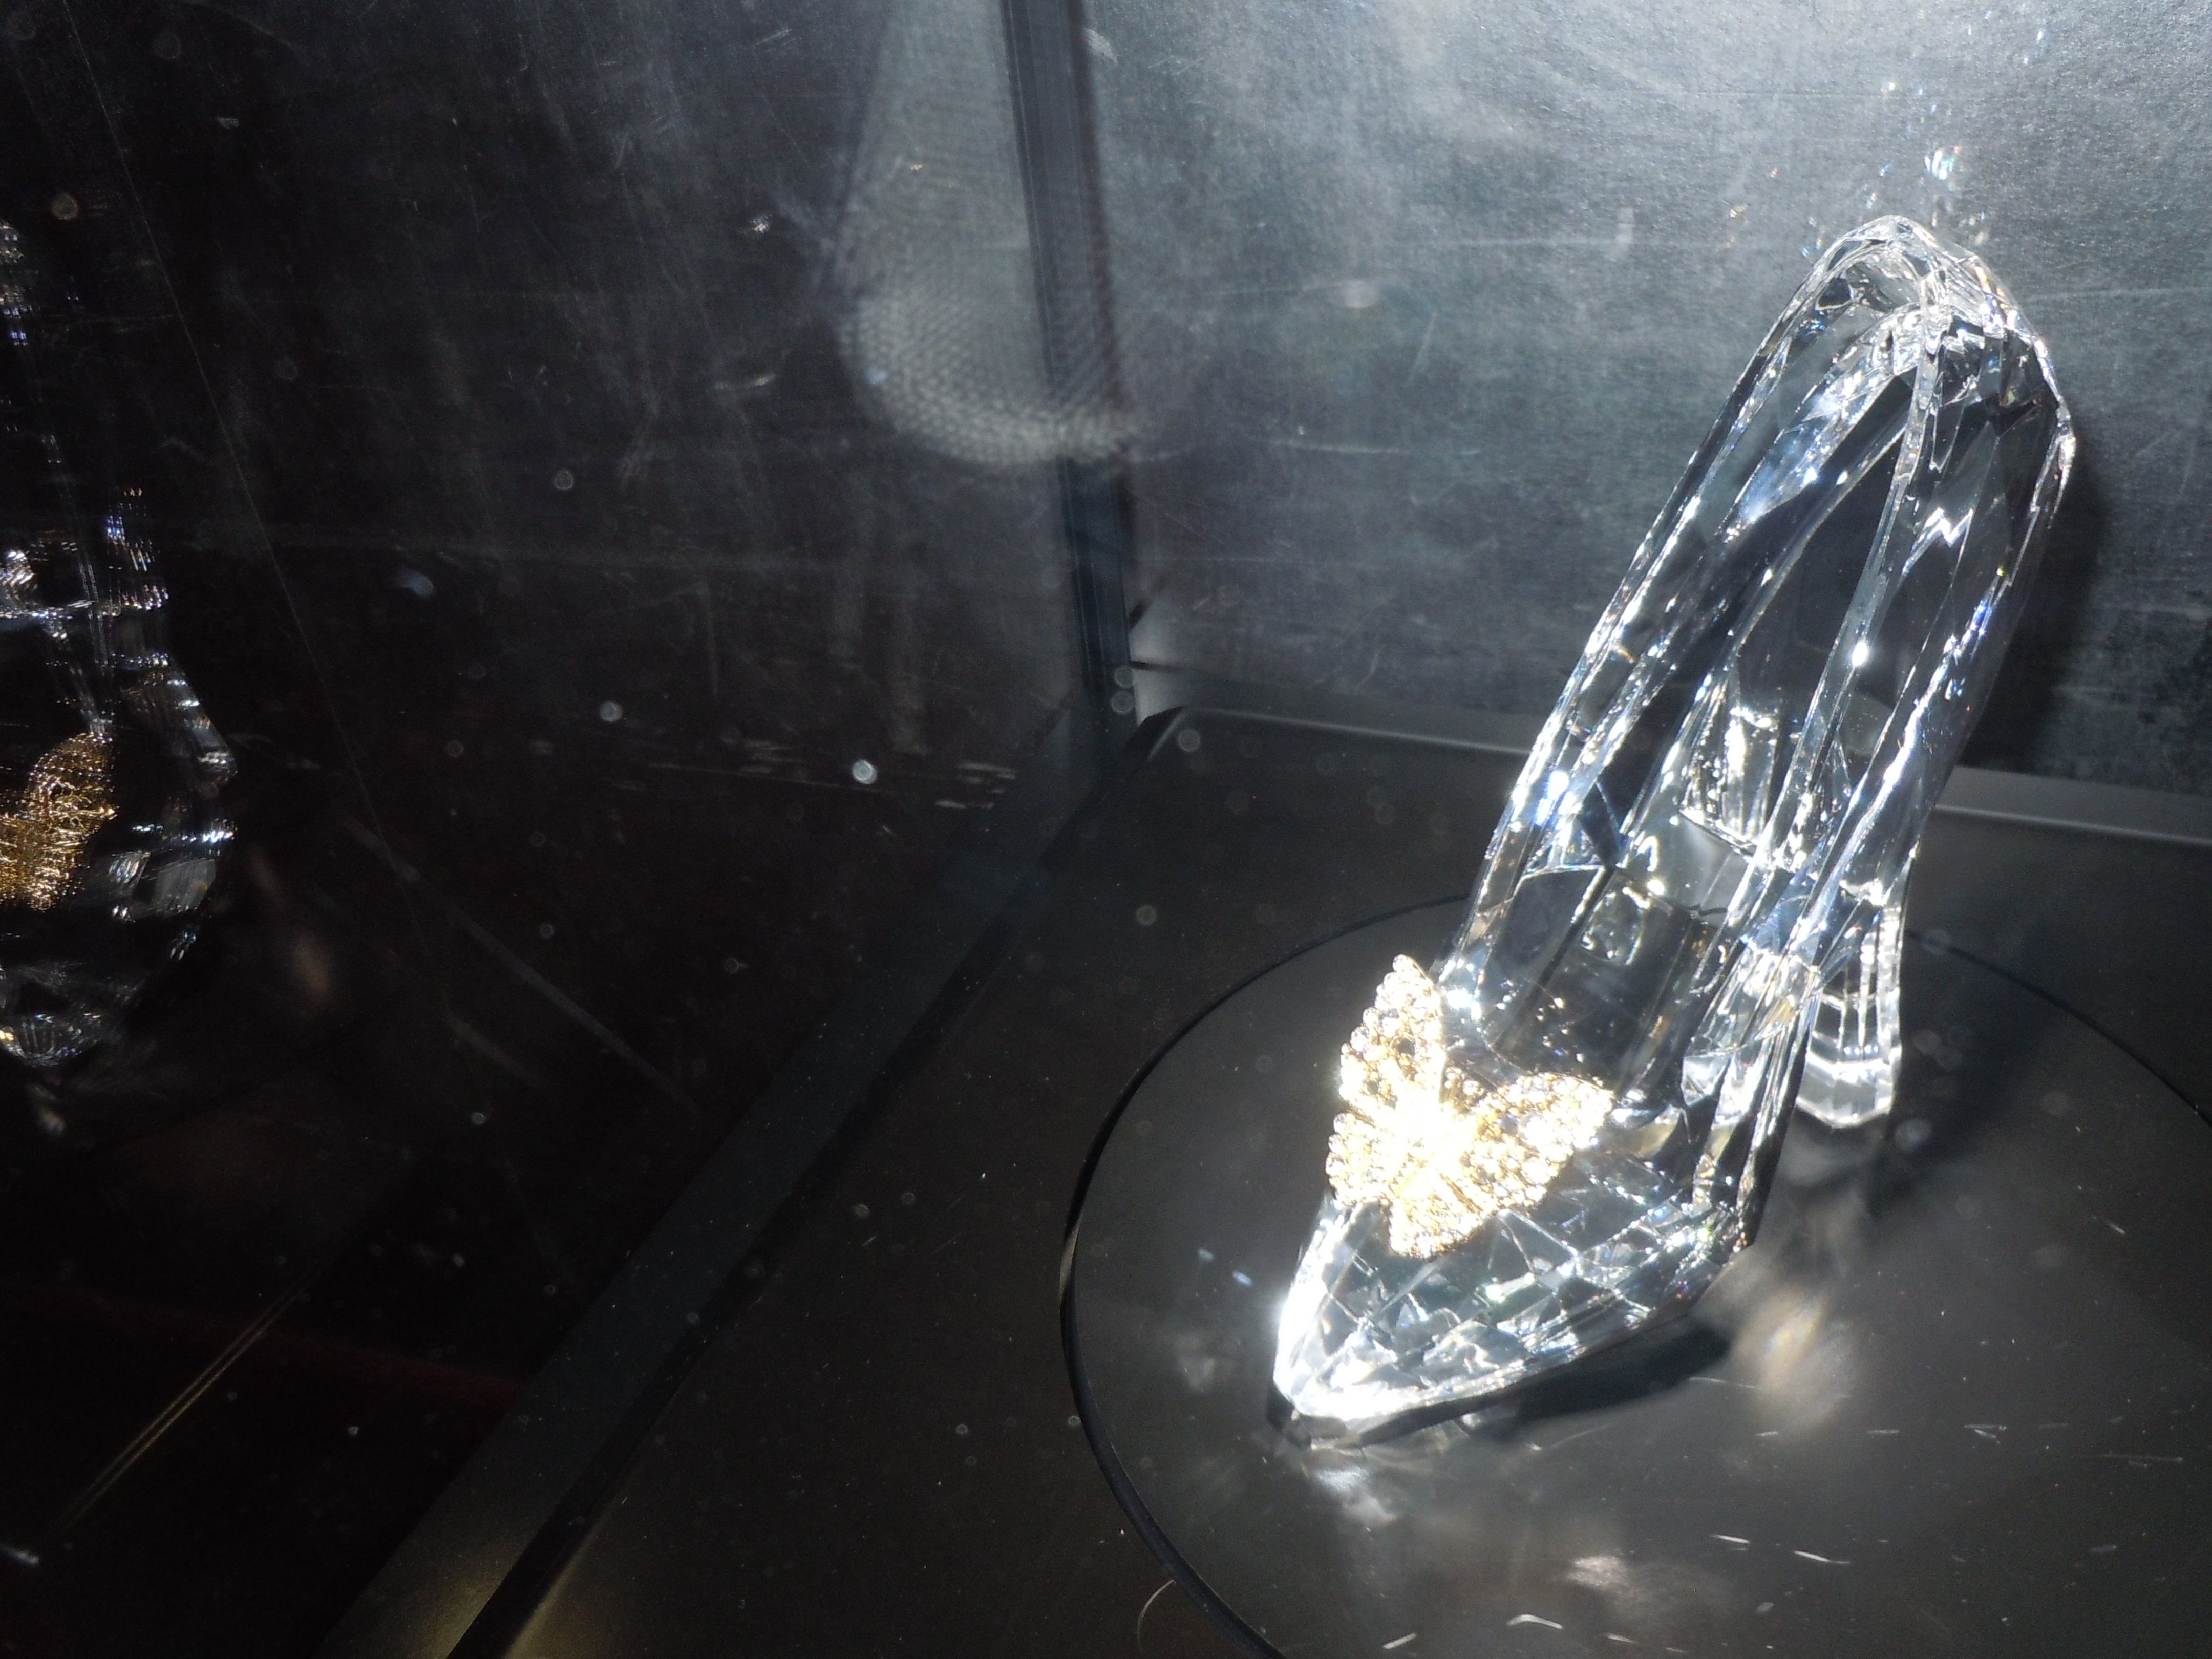 Cinderella's slipper at The Dolby Theatre. (2015)